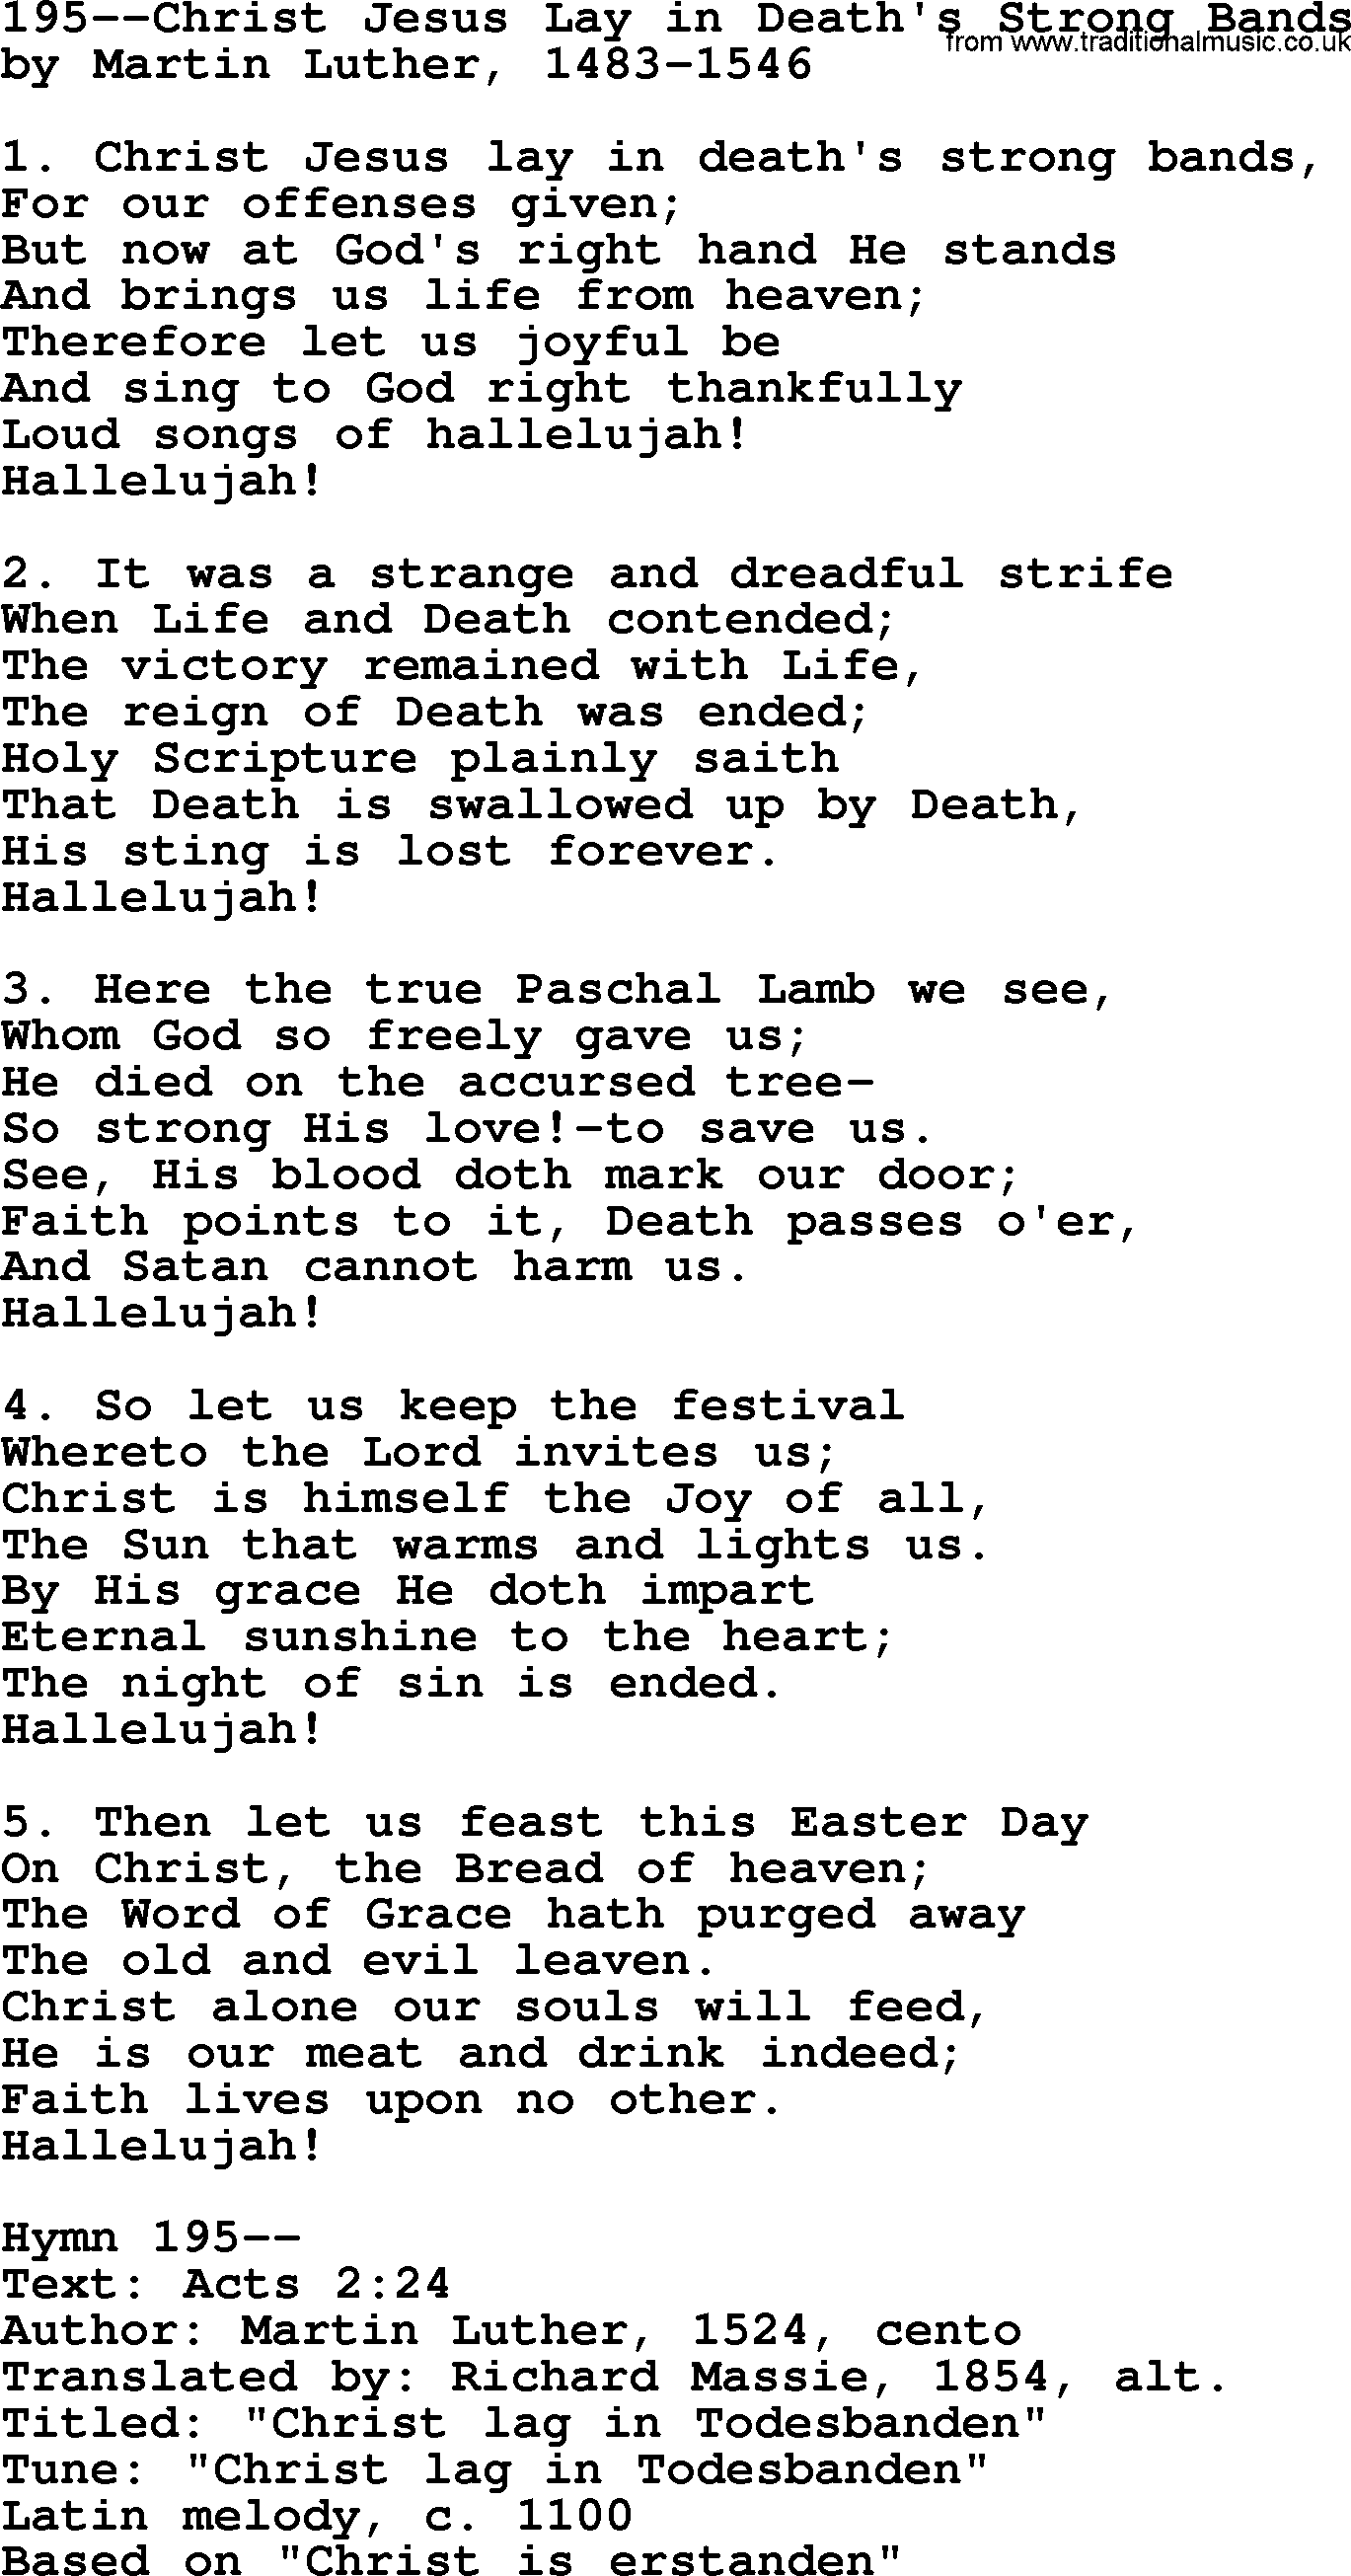 Lutheran Hymn: 195--Christ Jesus Lay in Death's Strong Bands.txt lyrics with PDF